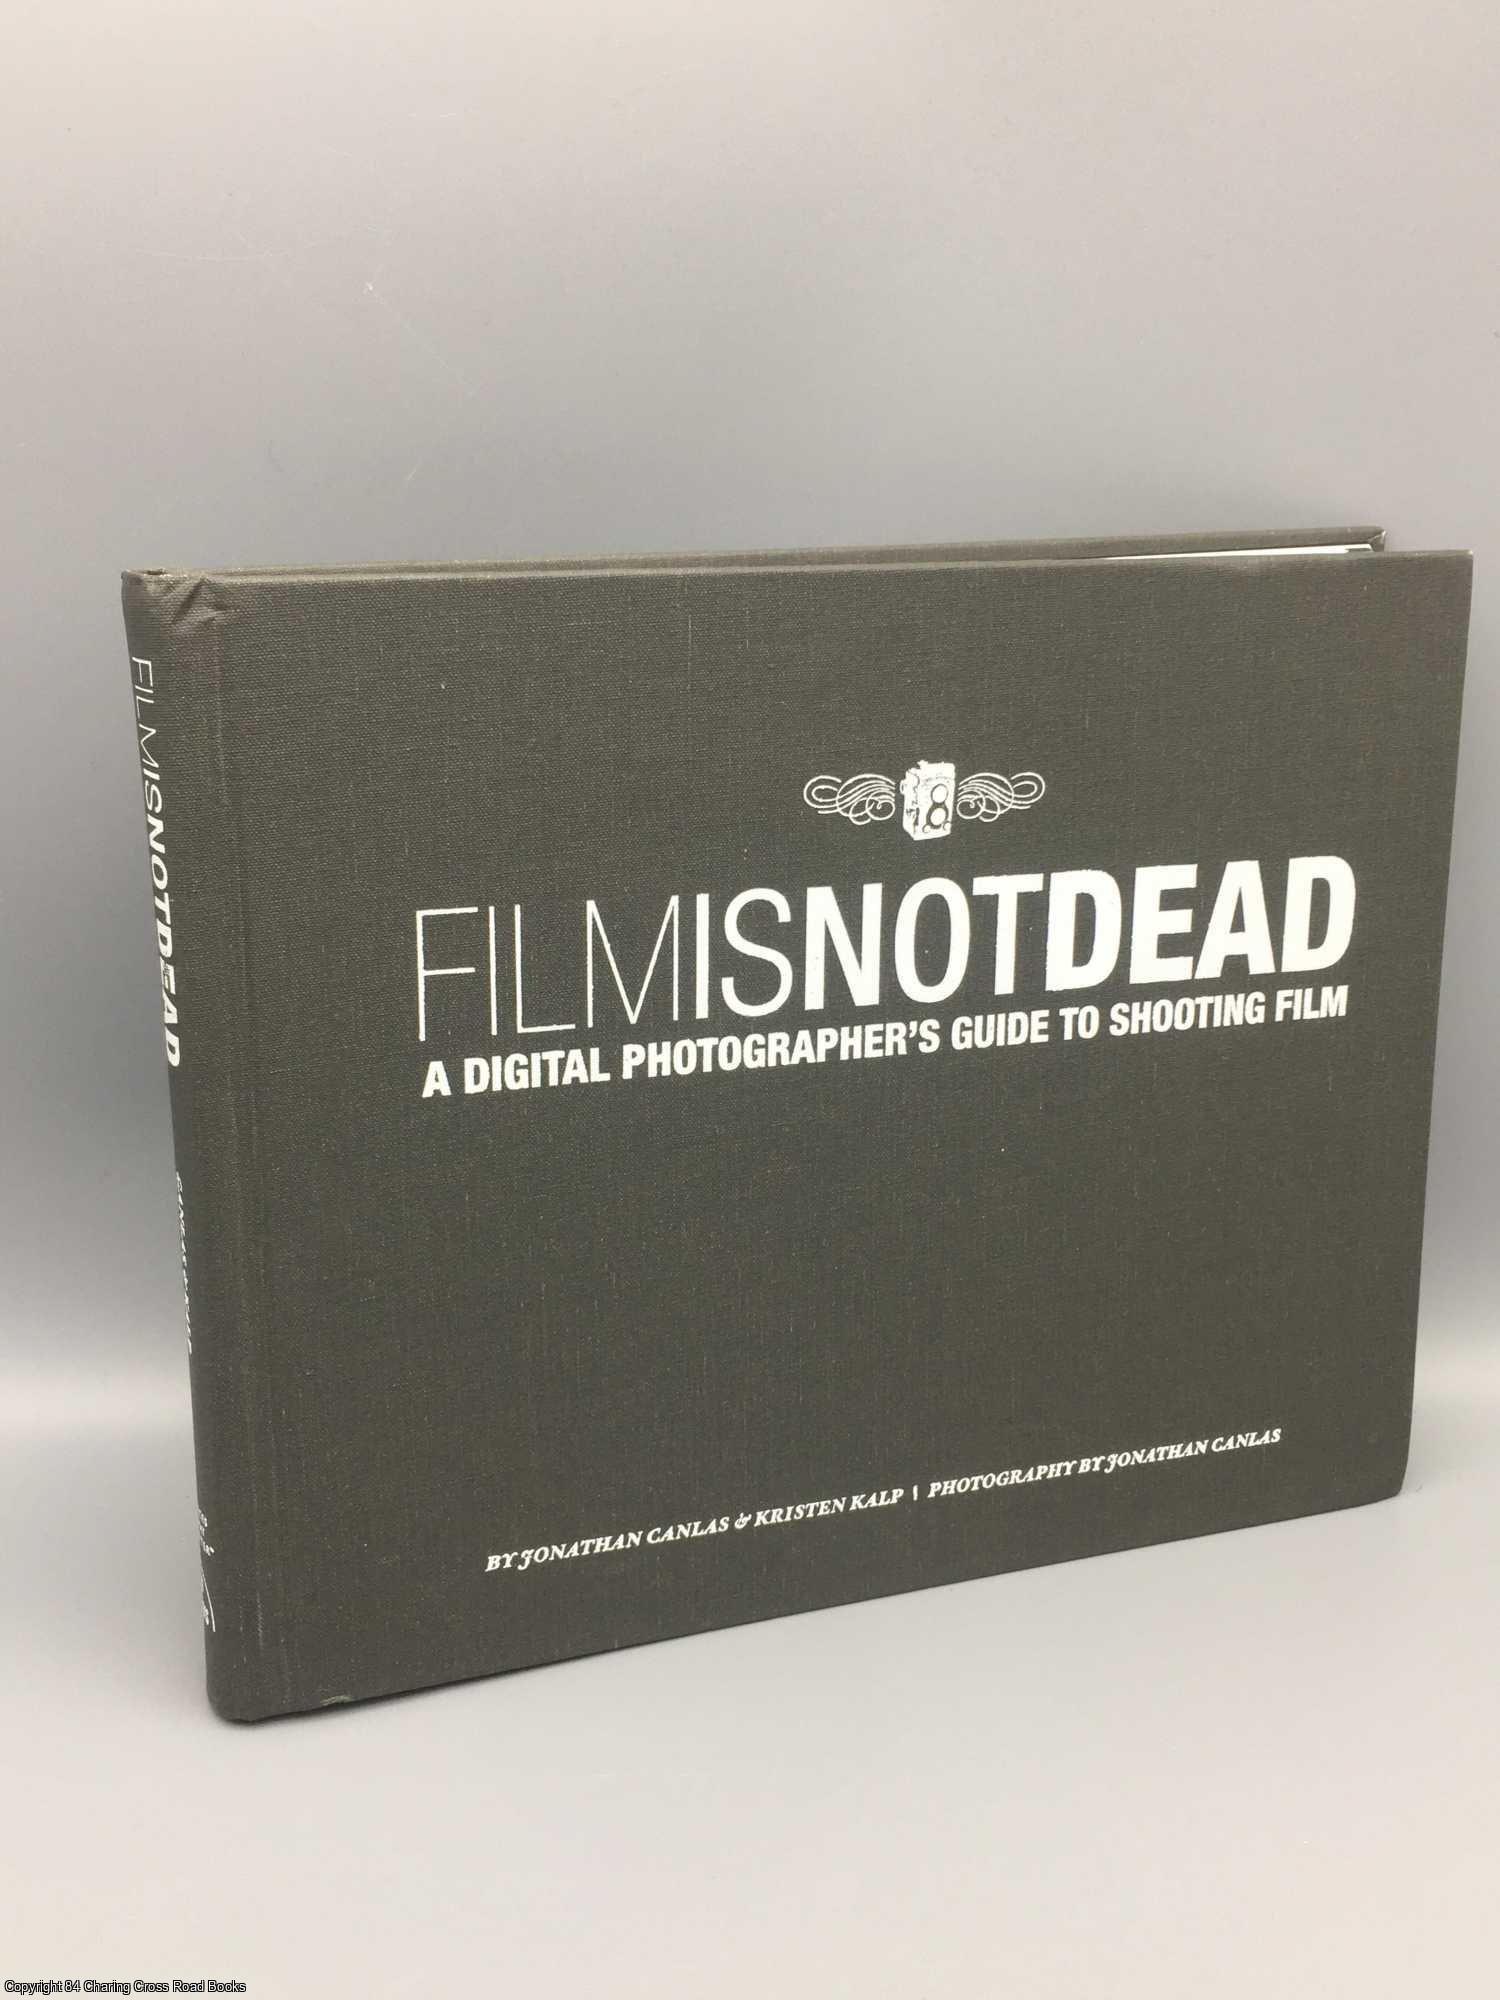 Canlas, Jonathan - Film is Not Dead: a digital photographer's guide to shooting film